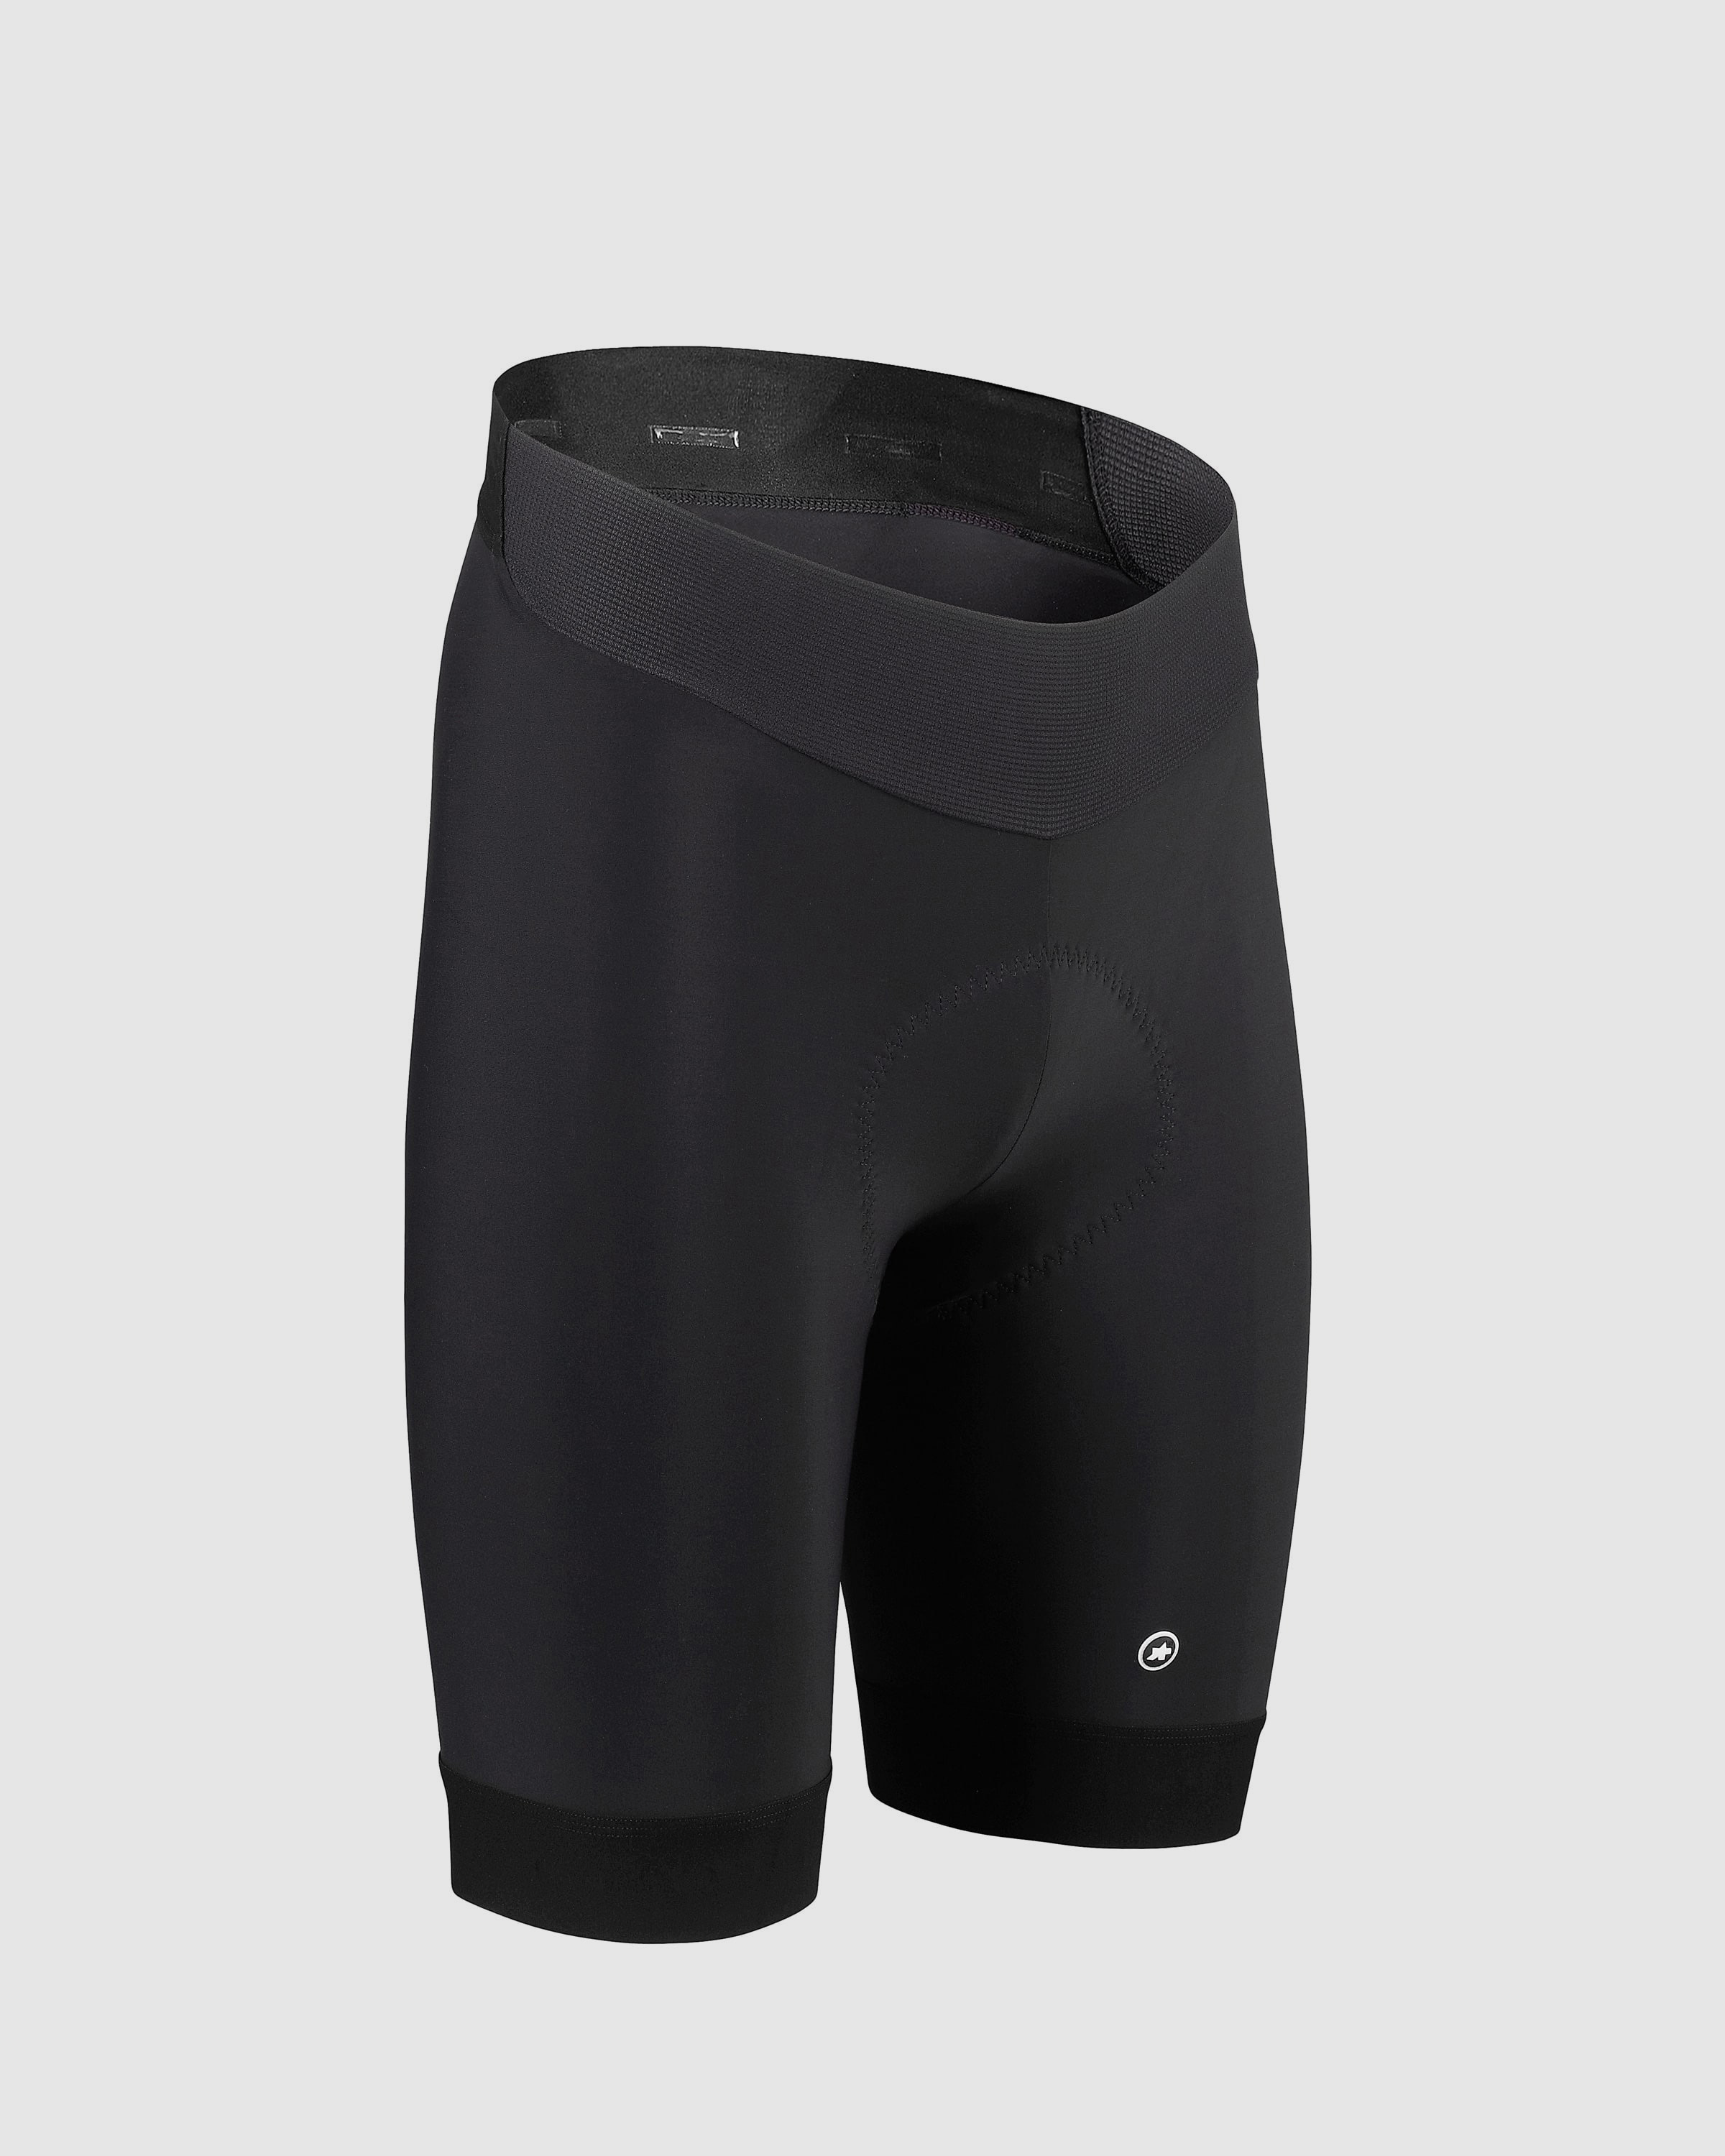 H.MilleShorts_S7 - ASSOS Of Switzerland - Official Outlet